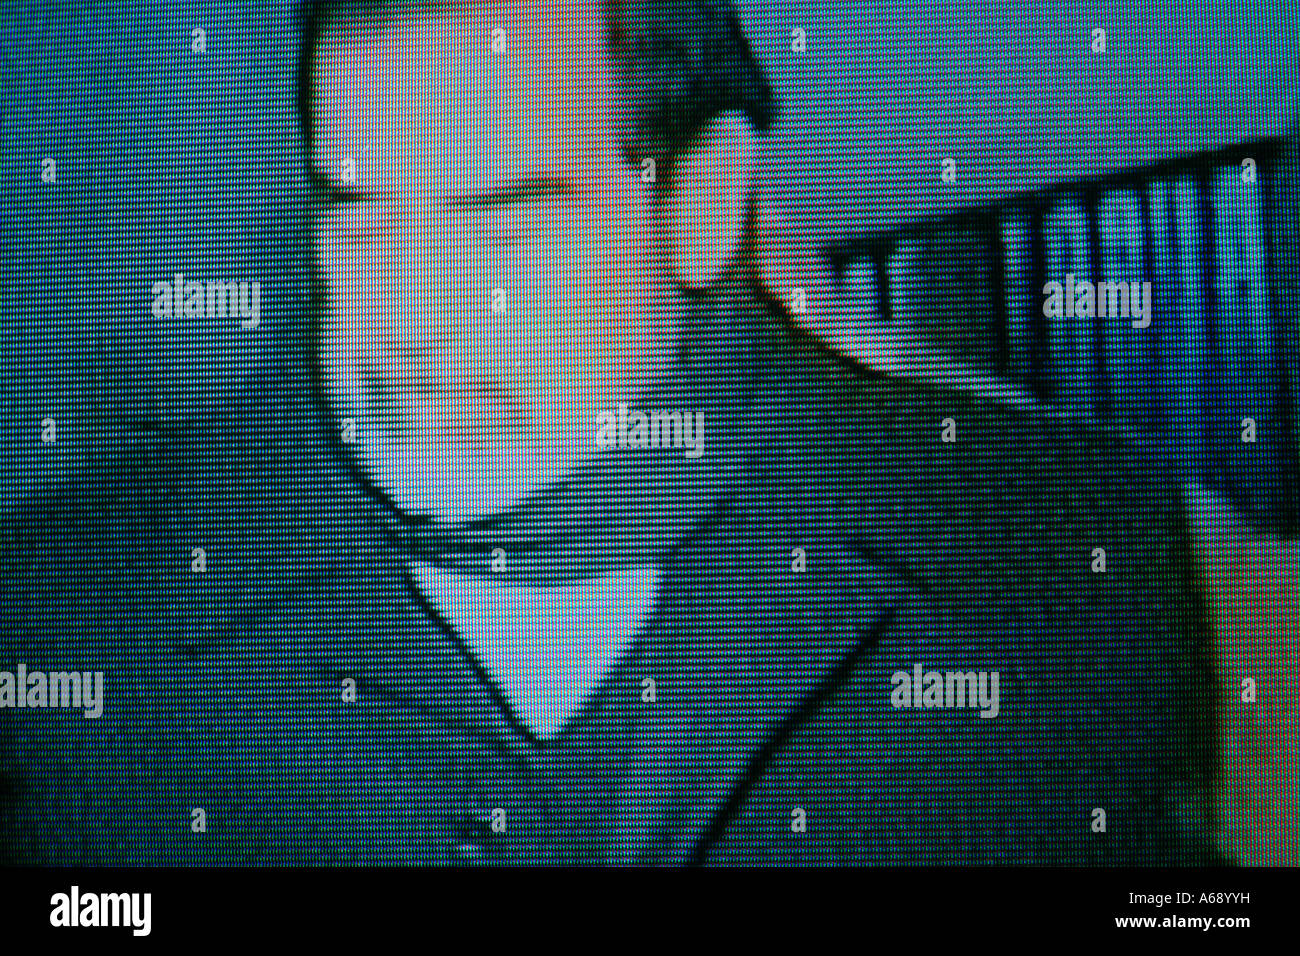 Televison Image of Saddam Hussein Just Prior to His Execution Stock Photo